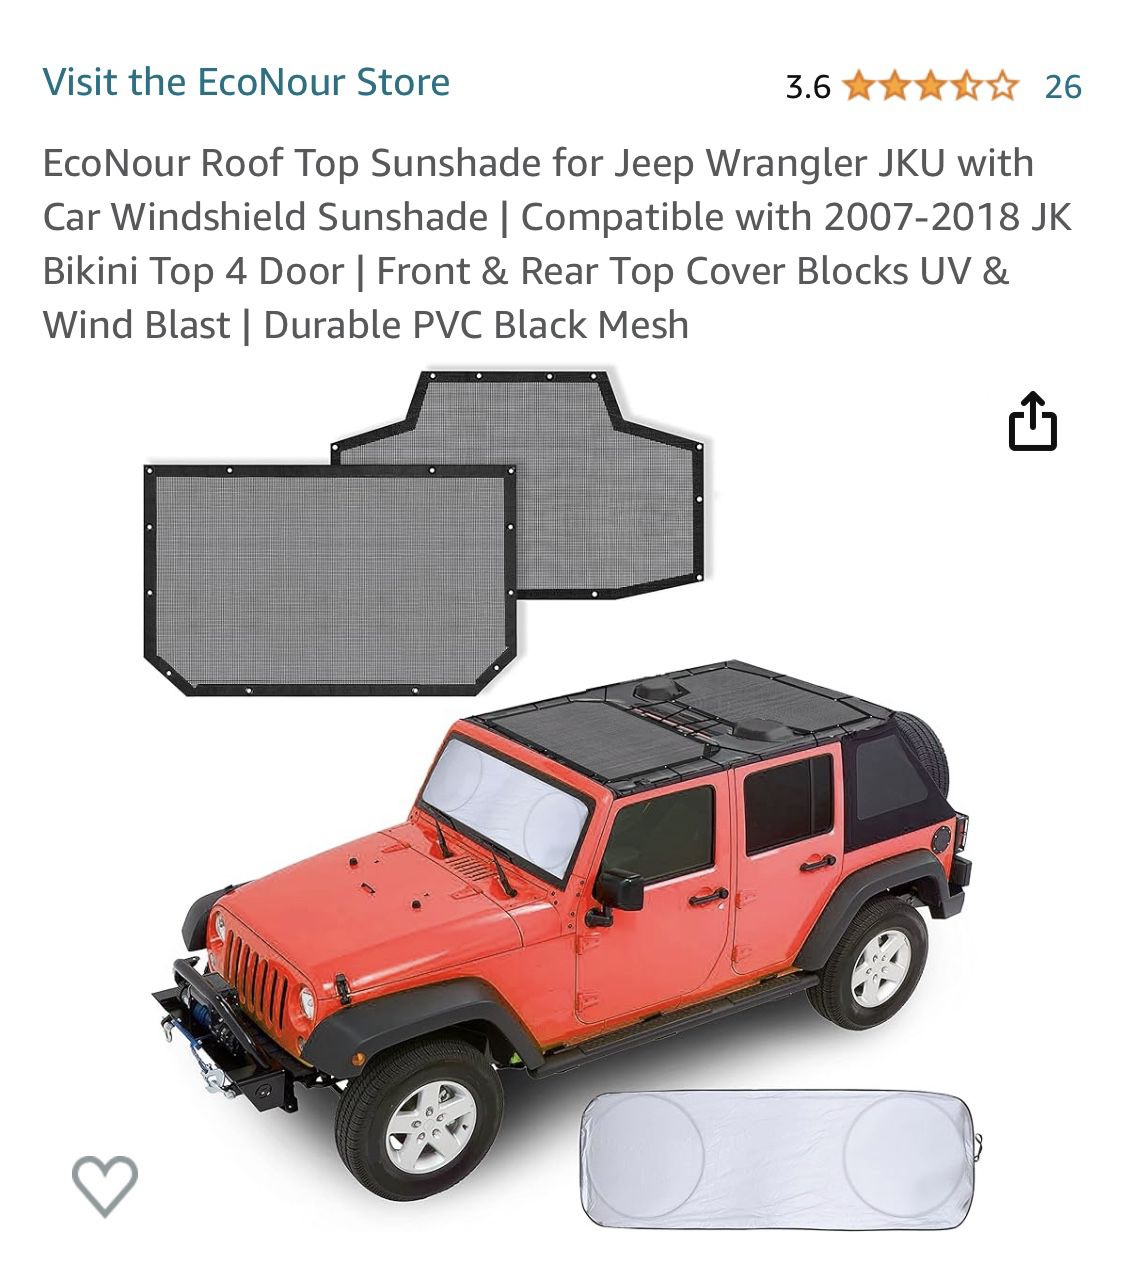 EcoNour Roof Top Sunshade for Jeep Wrangler JKU with Car Windshield Sunshade | Compatible with 2007-2018 JK Bikini Top 4 Door | Front & Rear Top Cover